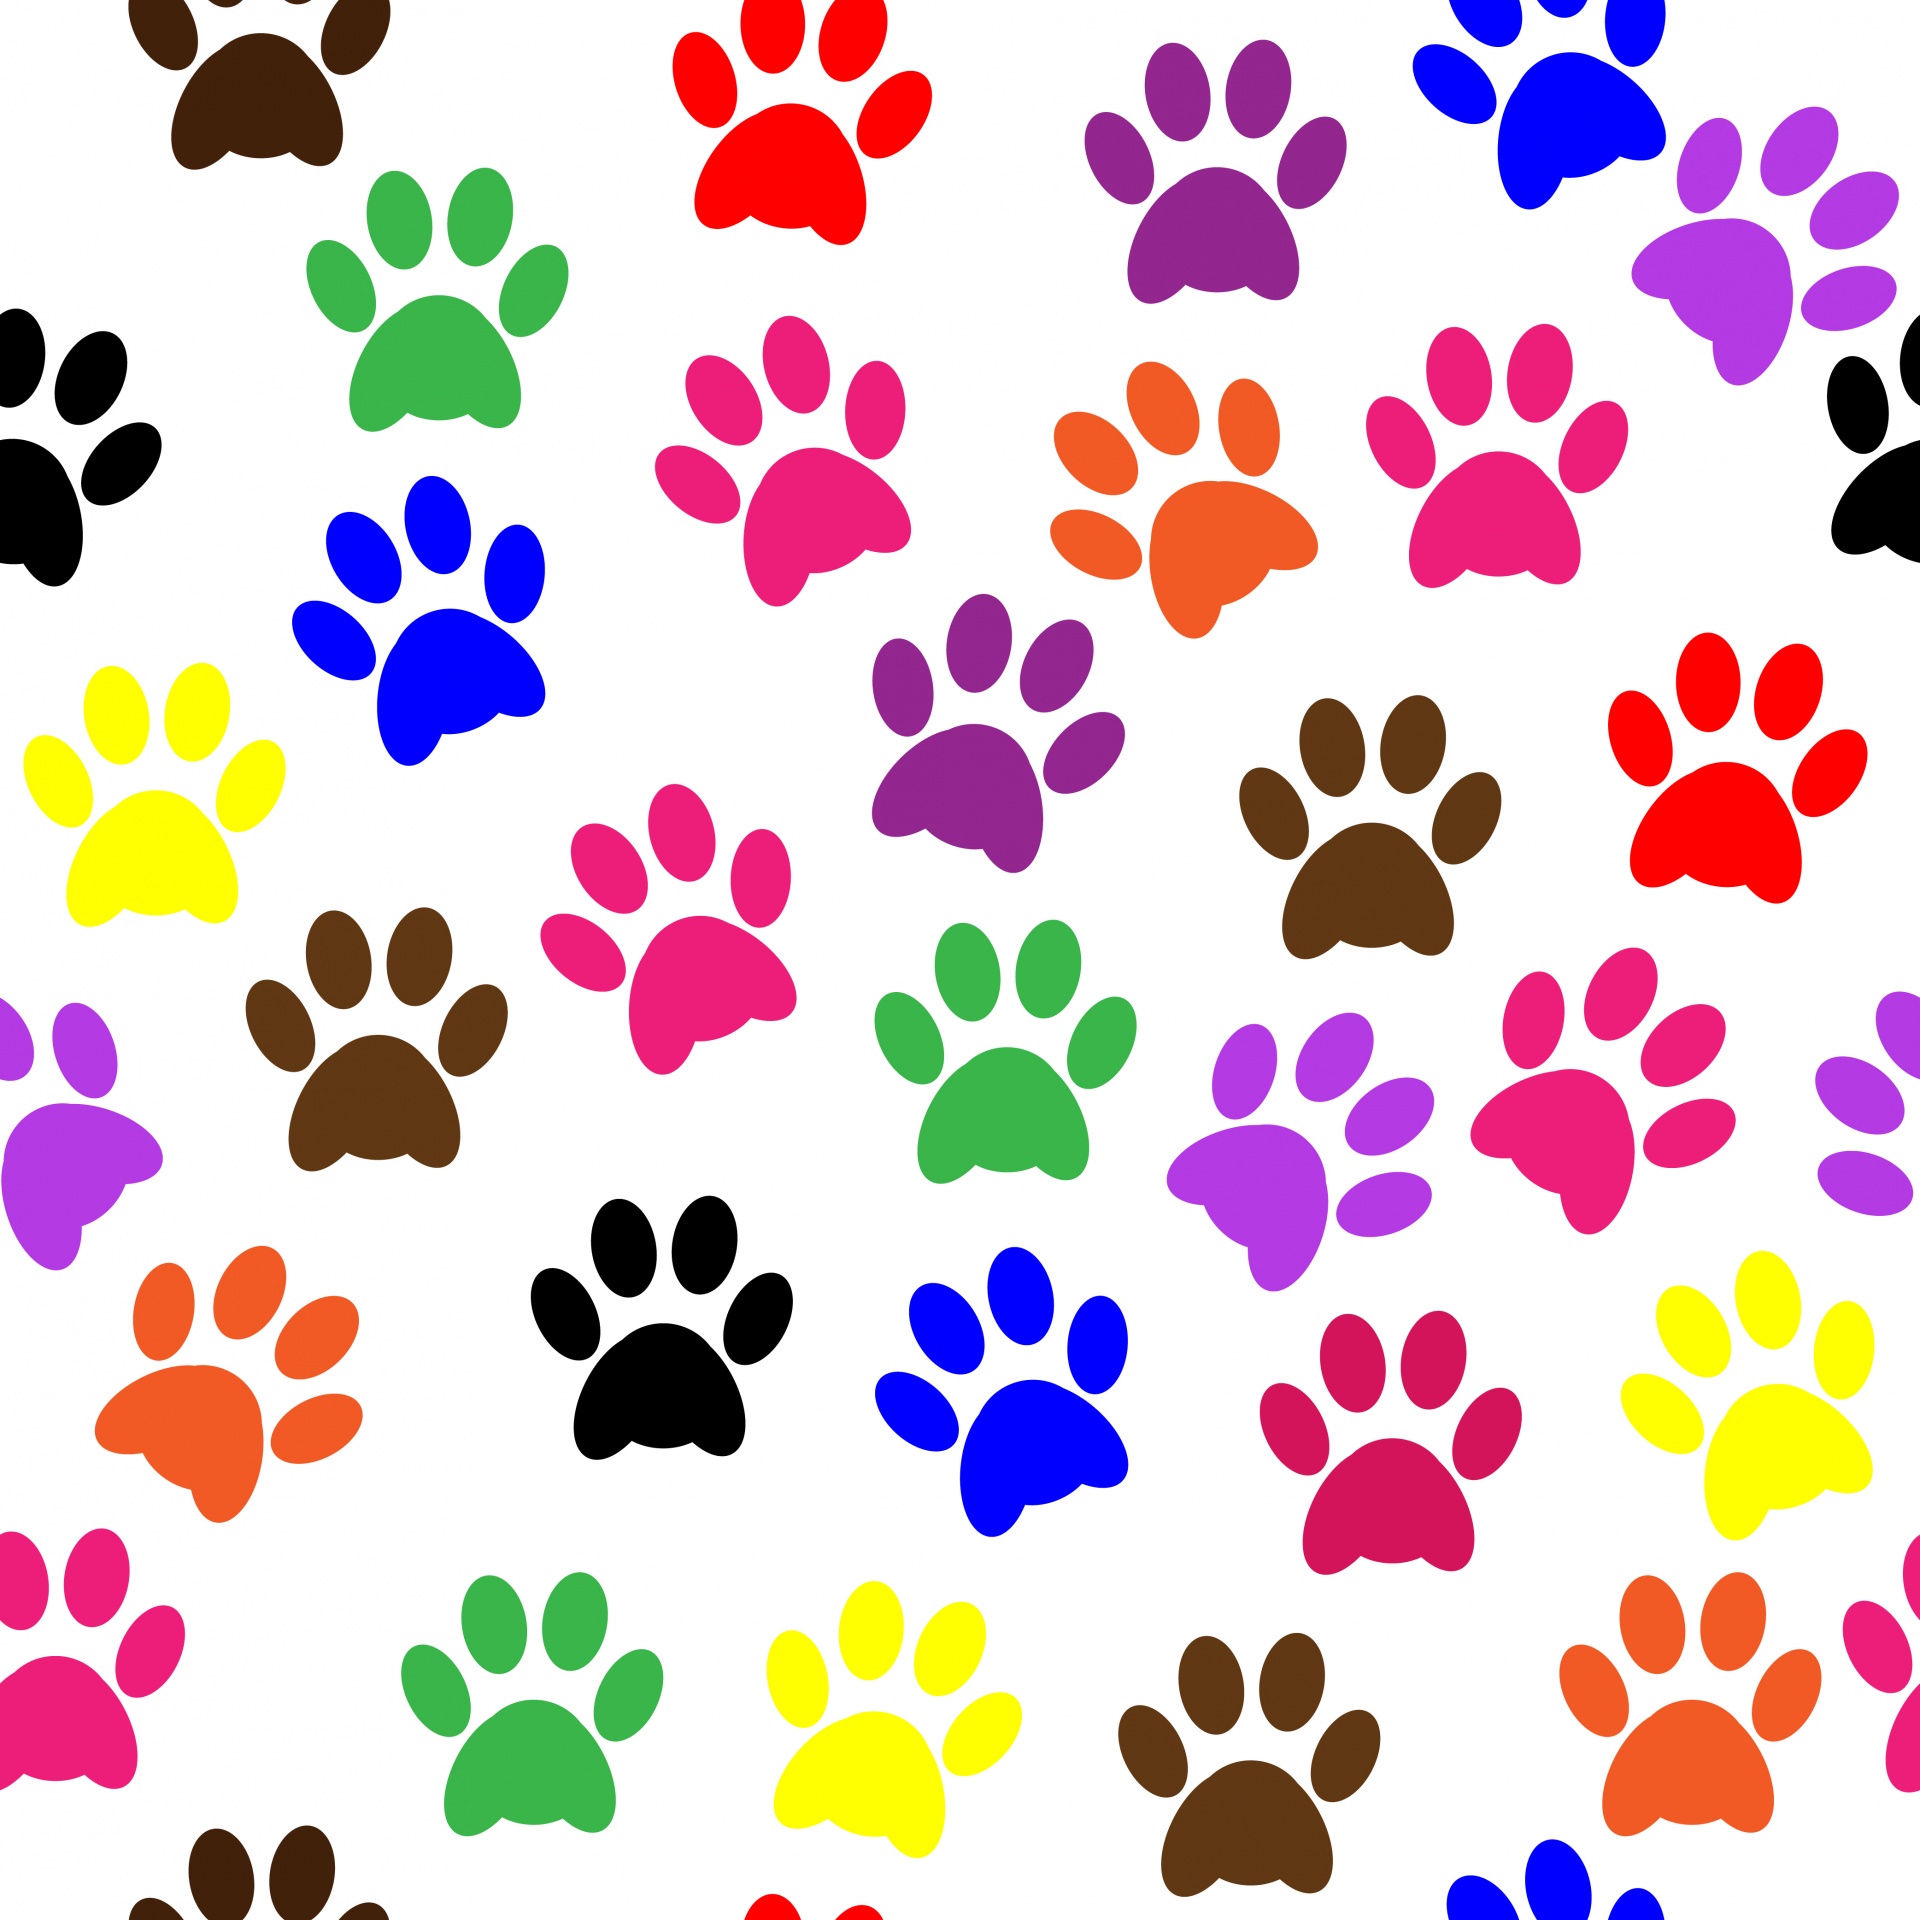 Dog Paw Images - Public Domain Pictures - Page 1